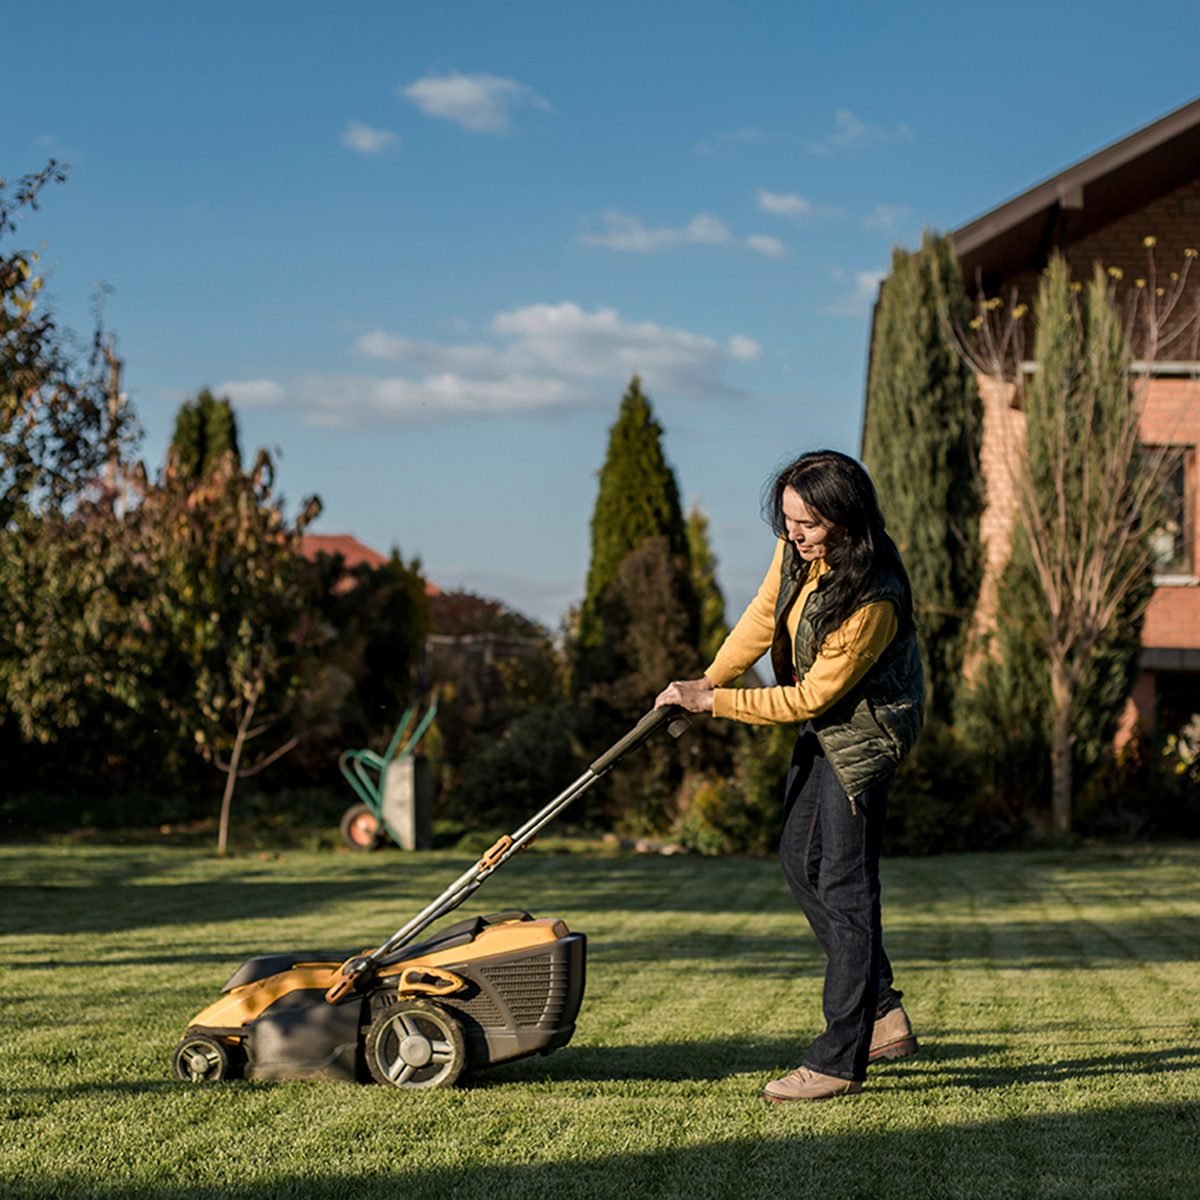 Woman Mowing Grass With Lawn Mower On Sunny Day